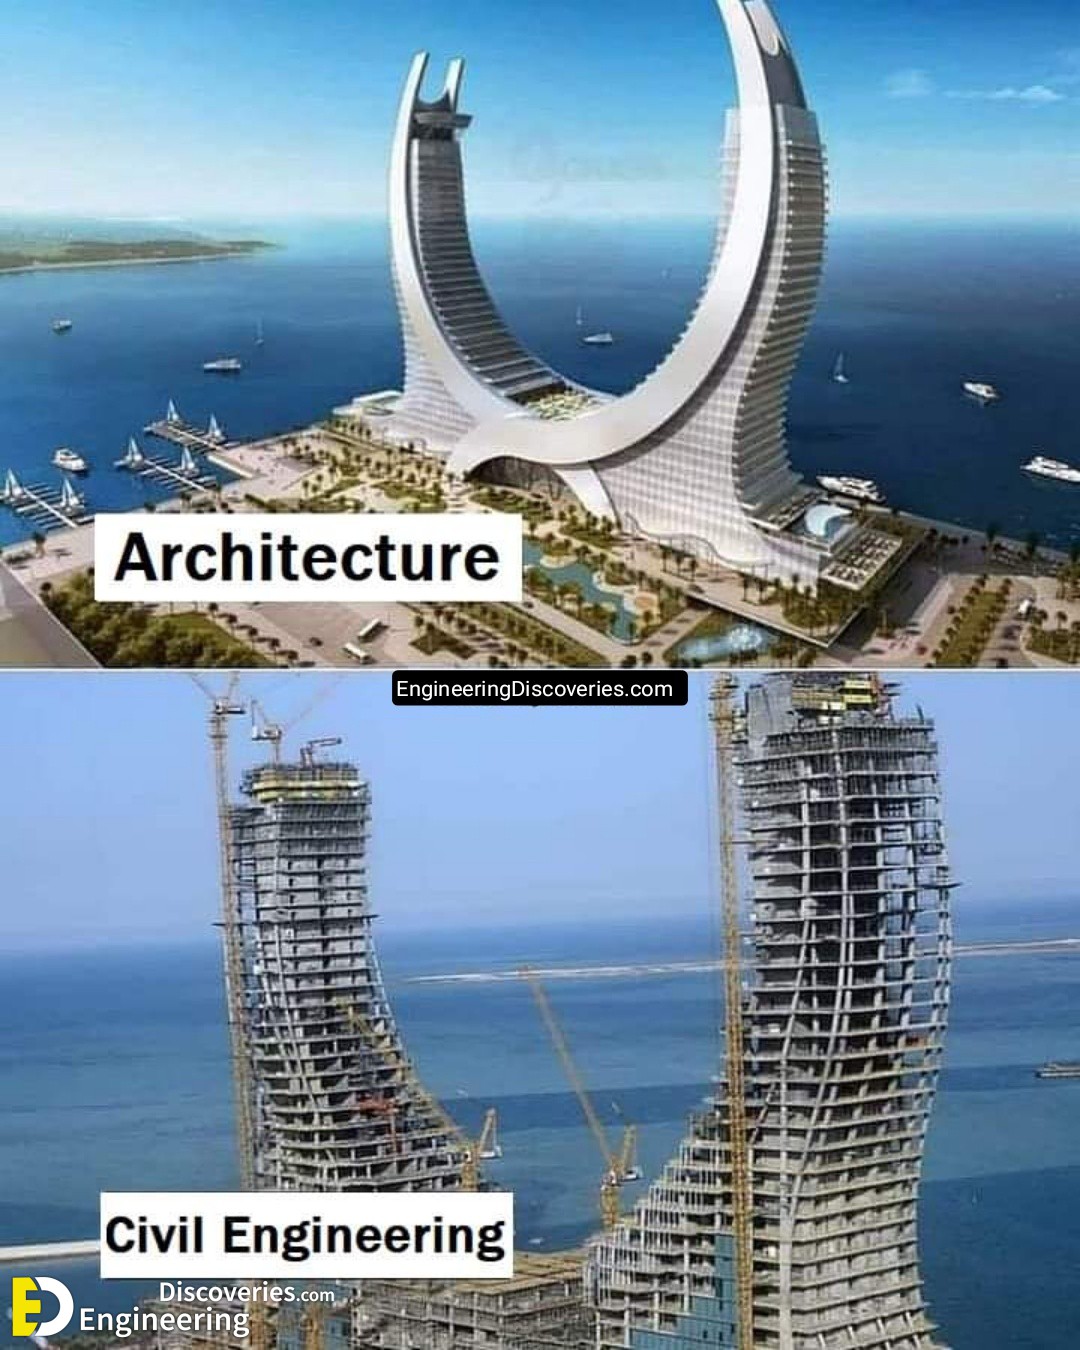 difference between architect and civil engineer